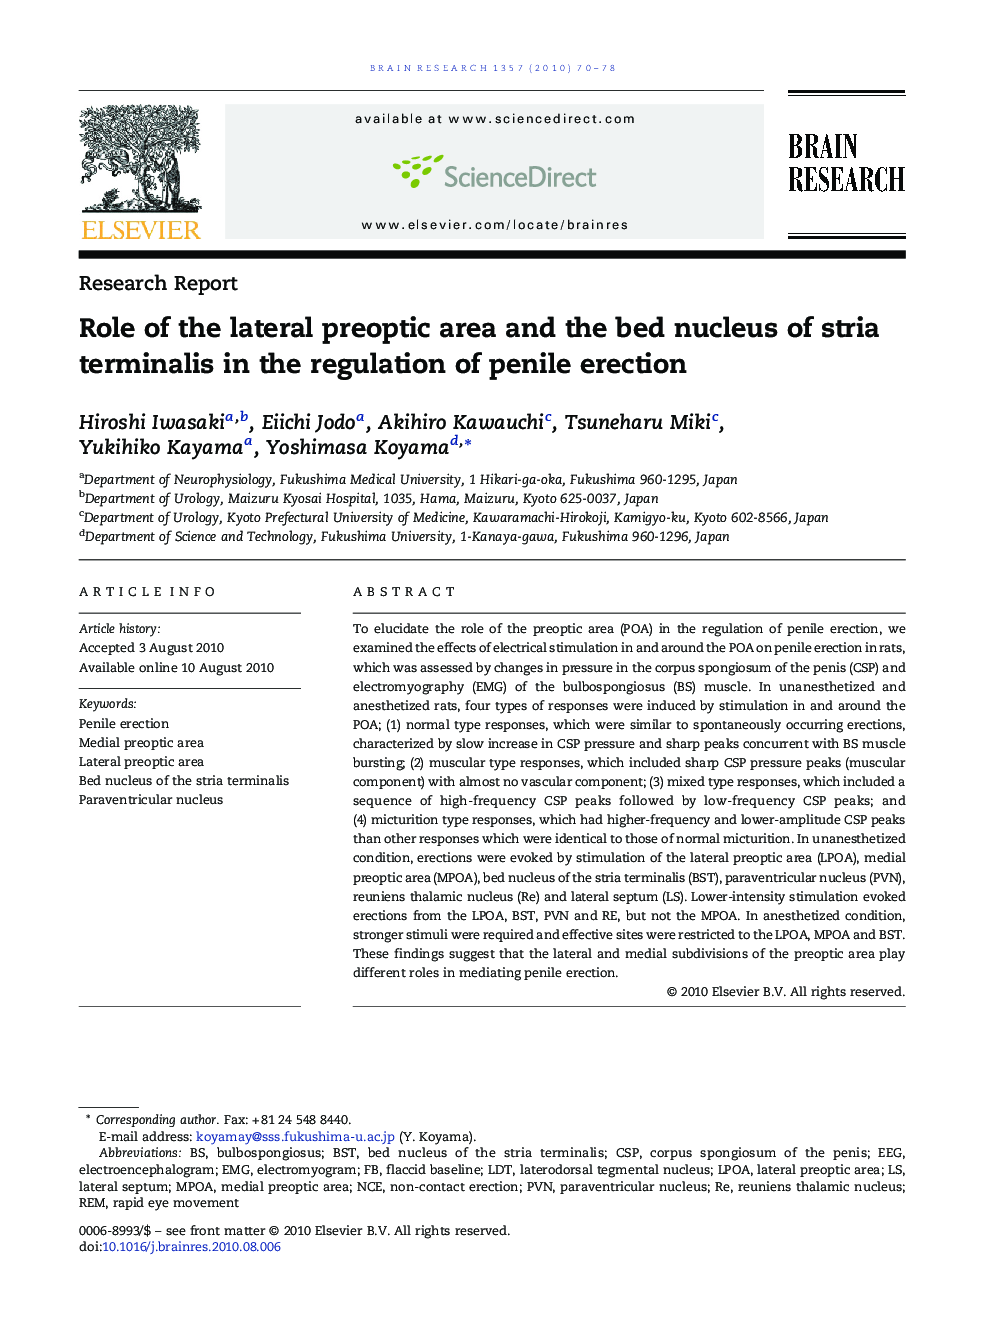 Role of the lateral preoptic area and the bed nucleus of stria terminalis in the regulation of penile erection